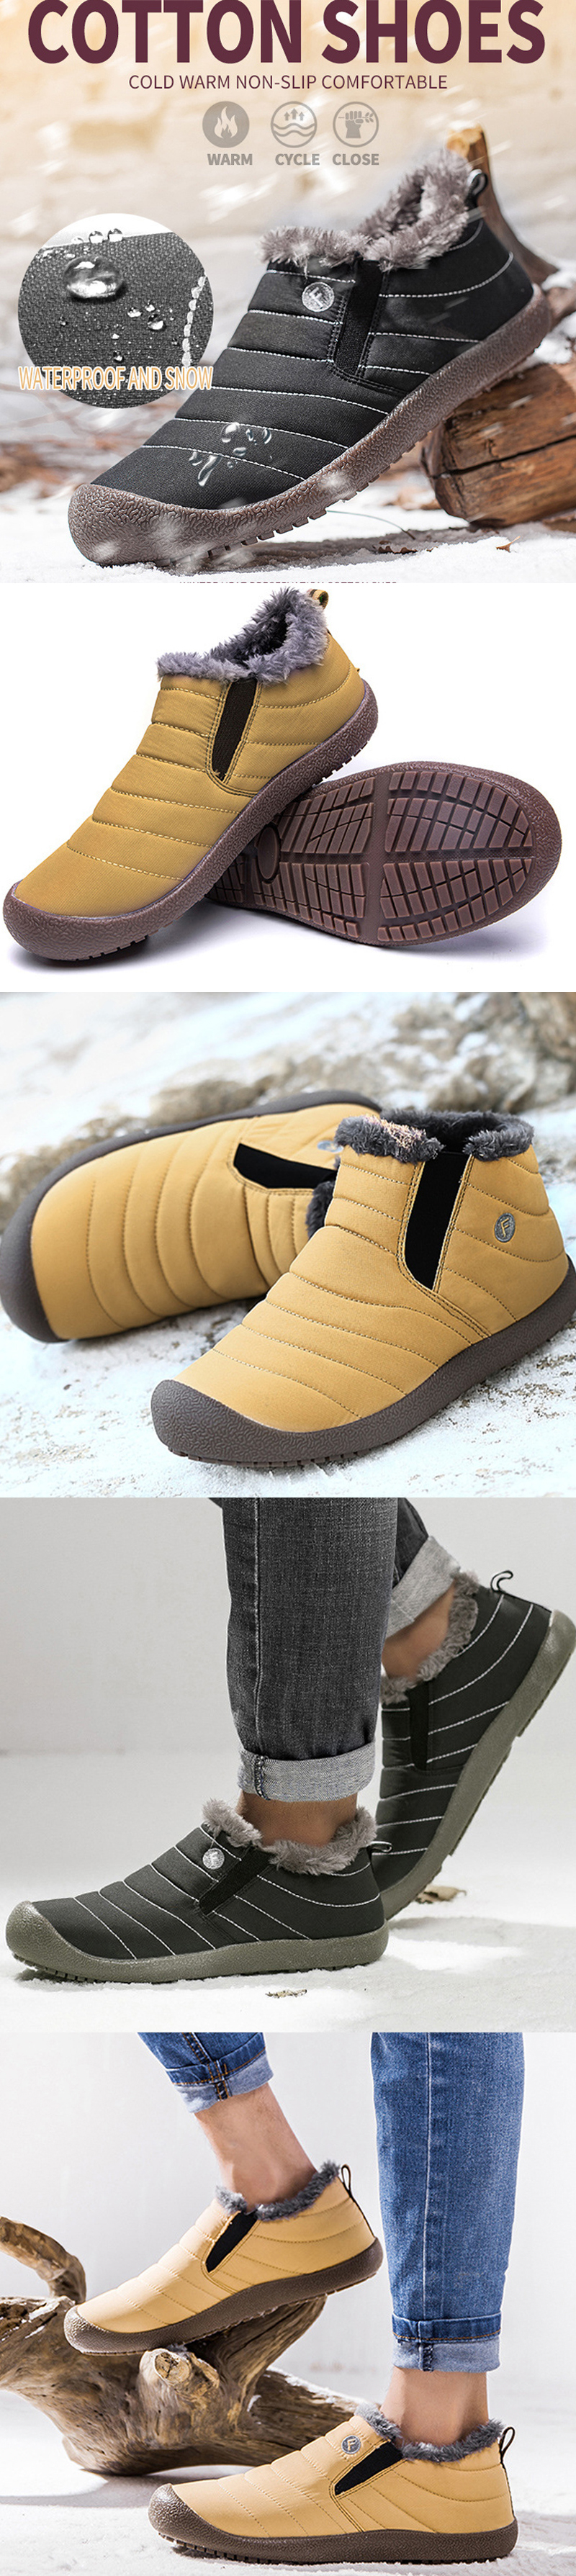 Mens-Winter-Warm-Ankle-Boots-Waterproof-Fur-Lined-Hiking-Shoes-Comfortable-Breathable-Martin-Shoes-1419045